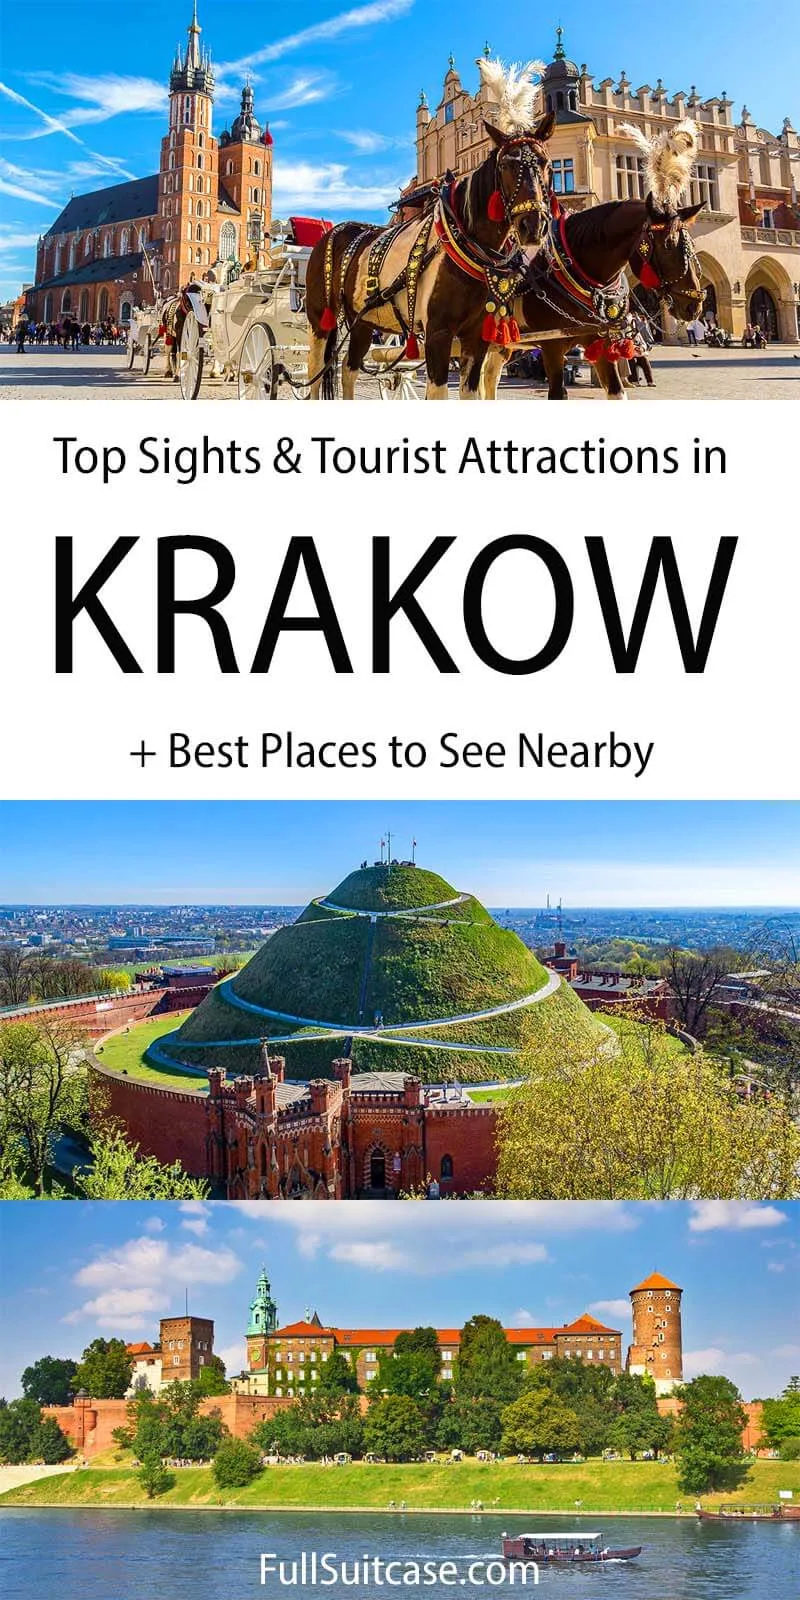 Tops sights and tourist attractions in and near Krakow Poland